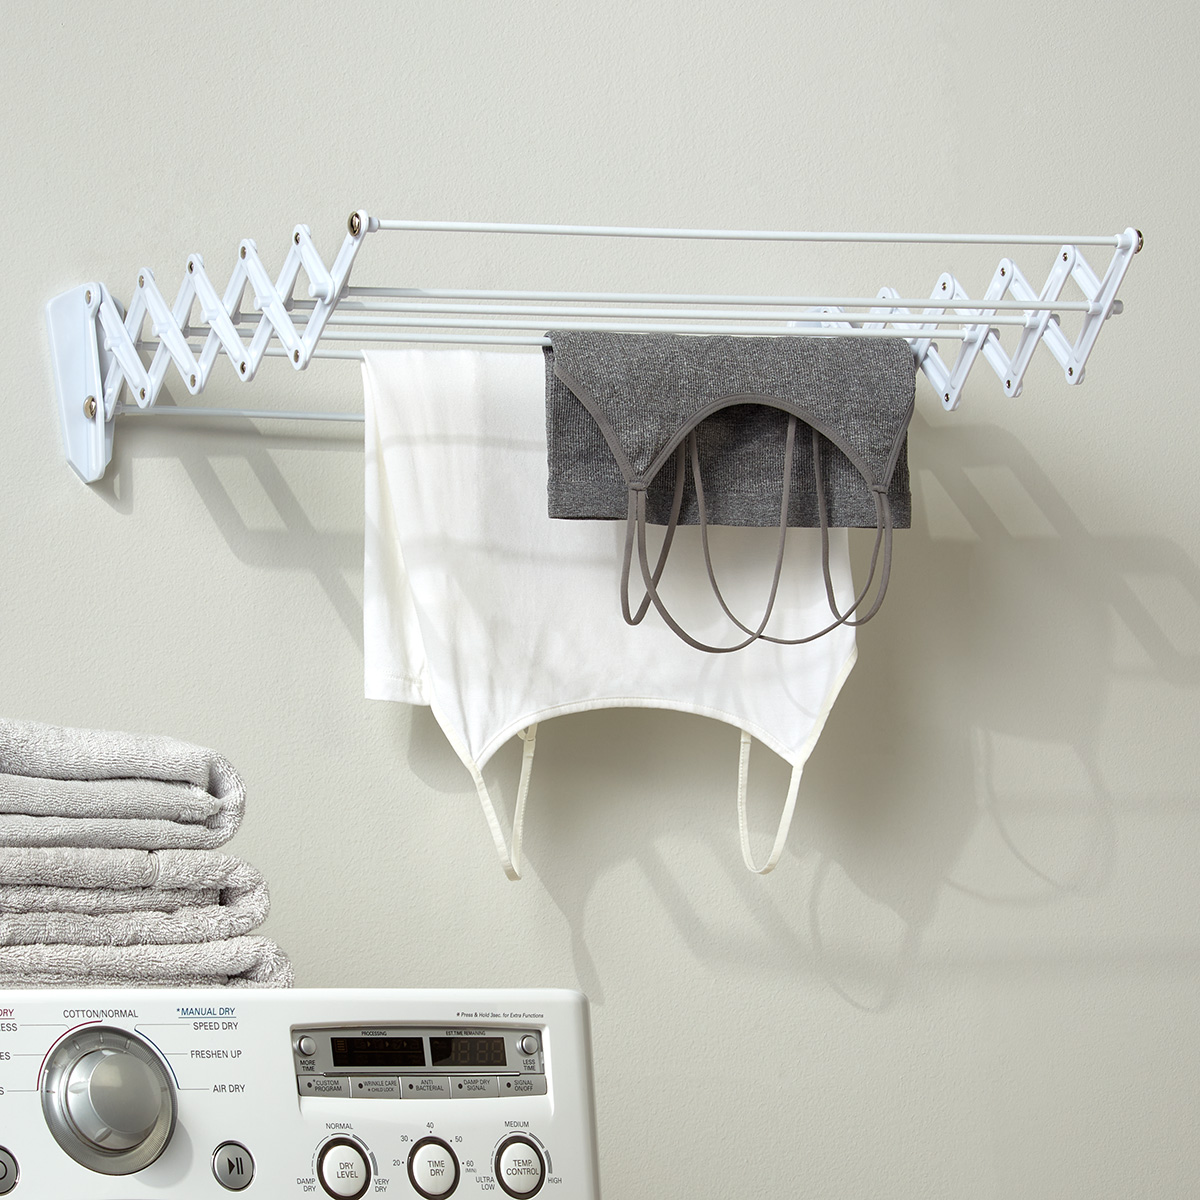 Wall / Ceiling Mounted Clothes Drying Rack, Clothes Airer, Hanging Laundry  Drying Rack, Clothes Drying Place, Laundry Room Drying Rack -  Israel